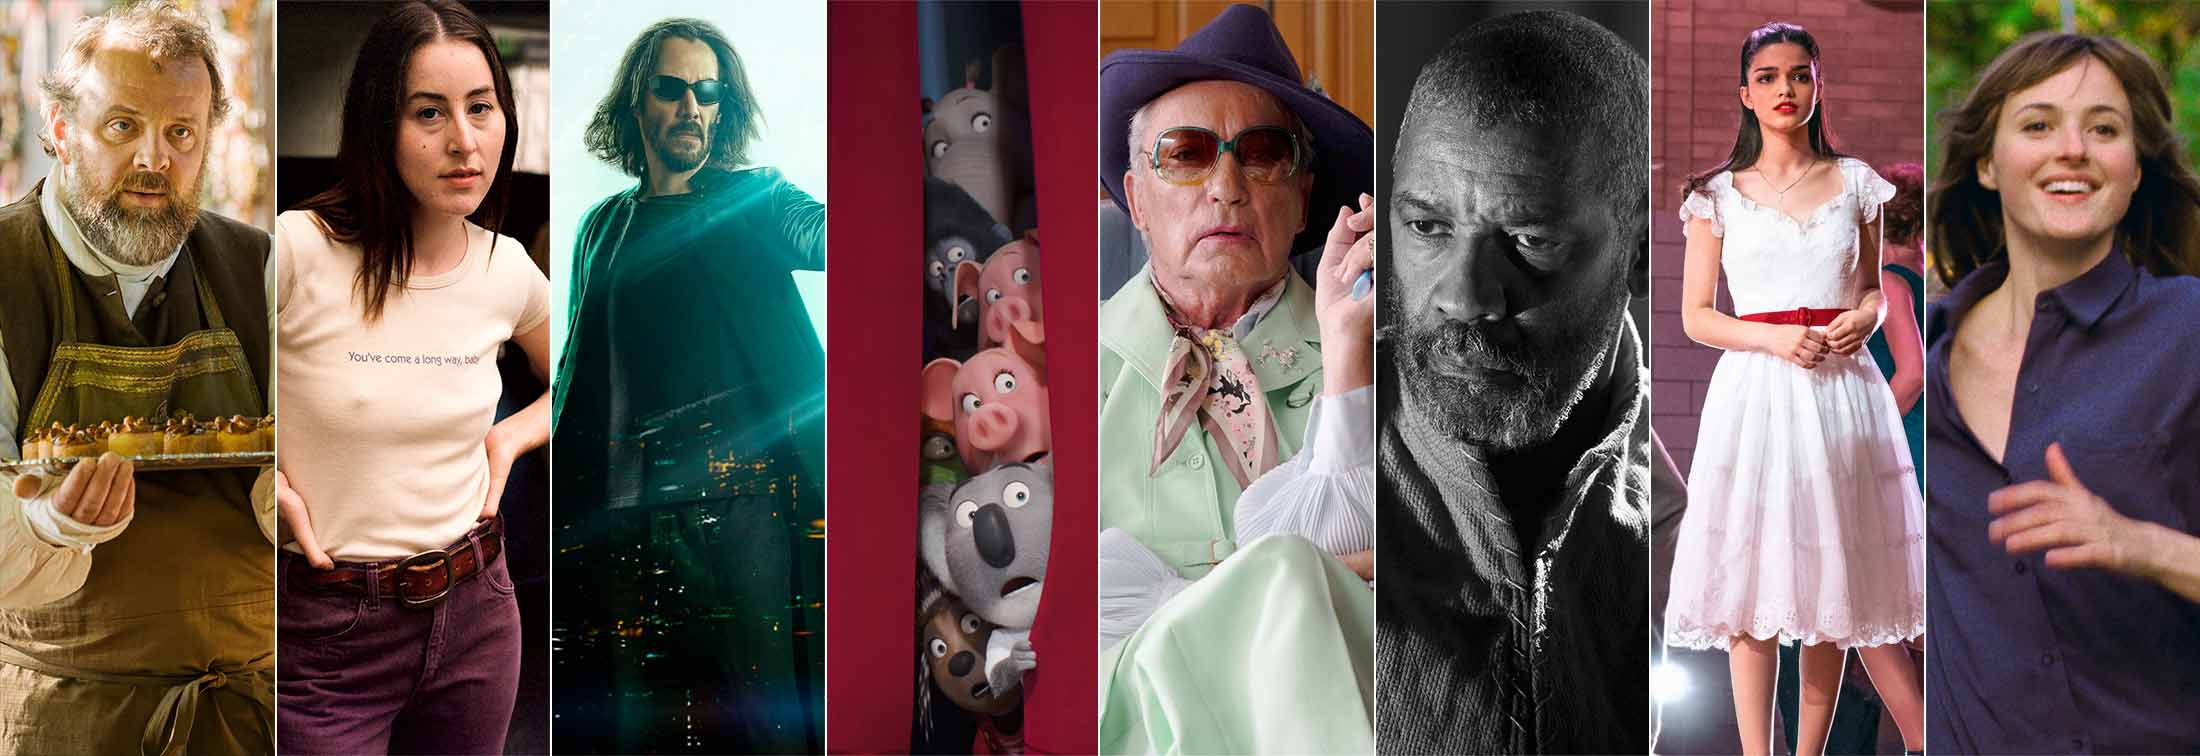 Boxing Day Movies 2021 - The year's biggest films bursting onto our cinema screens